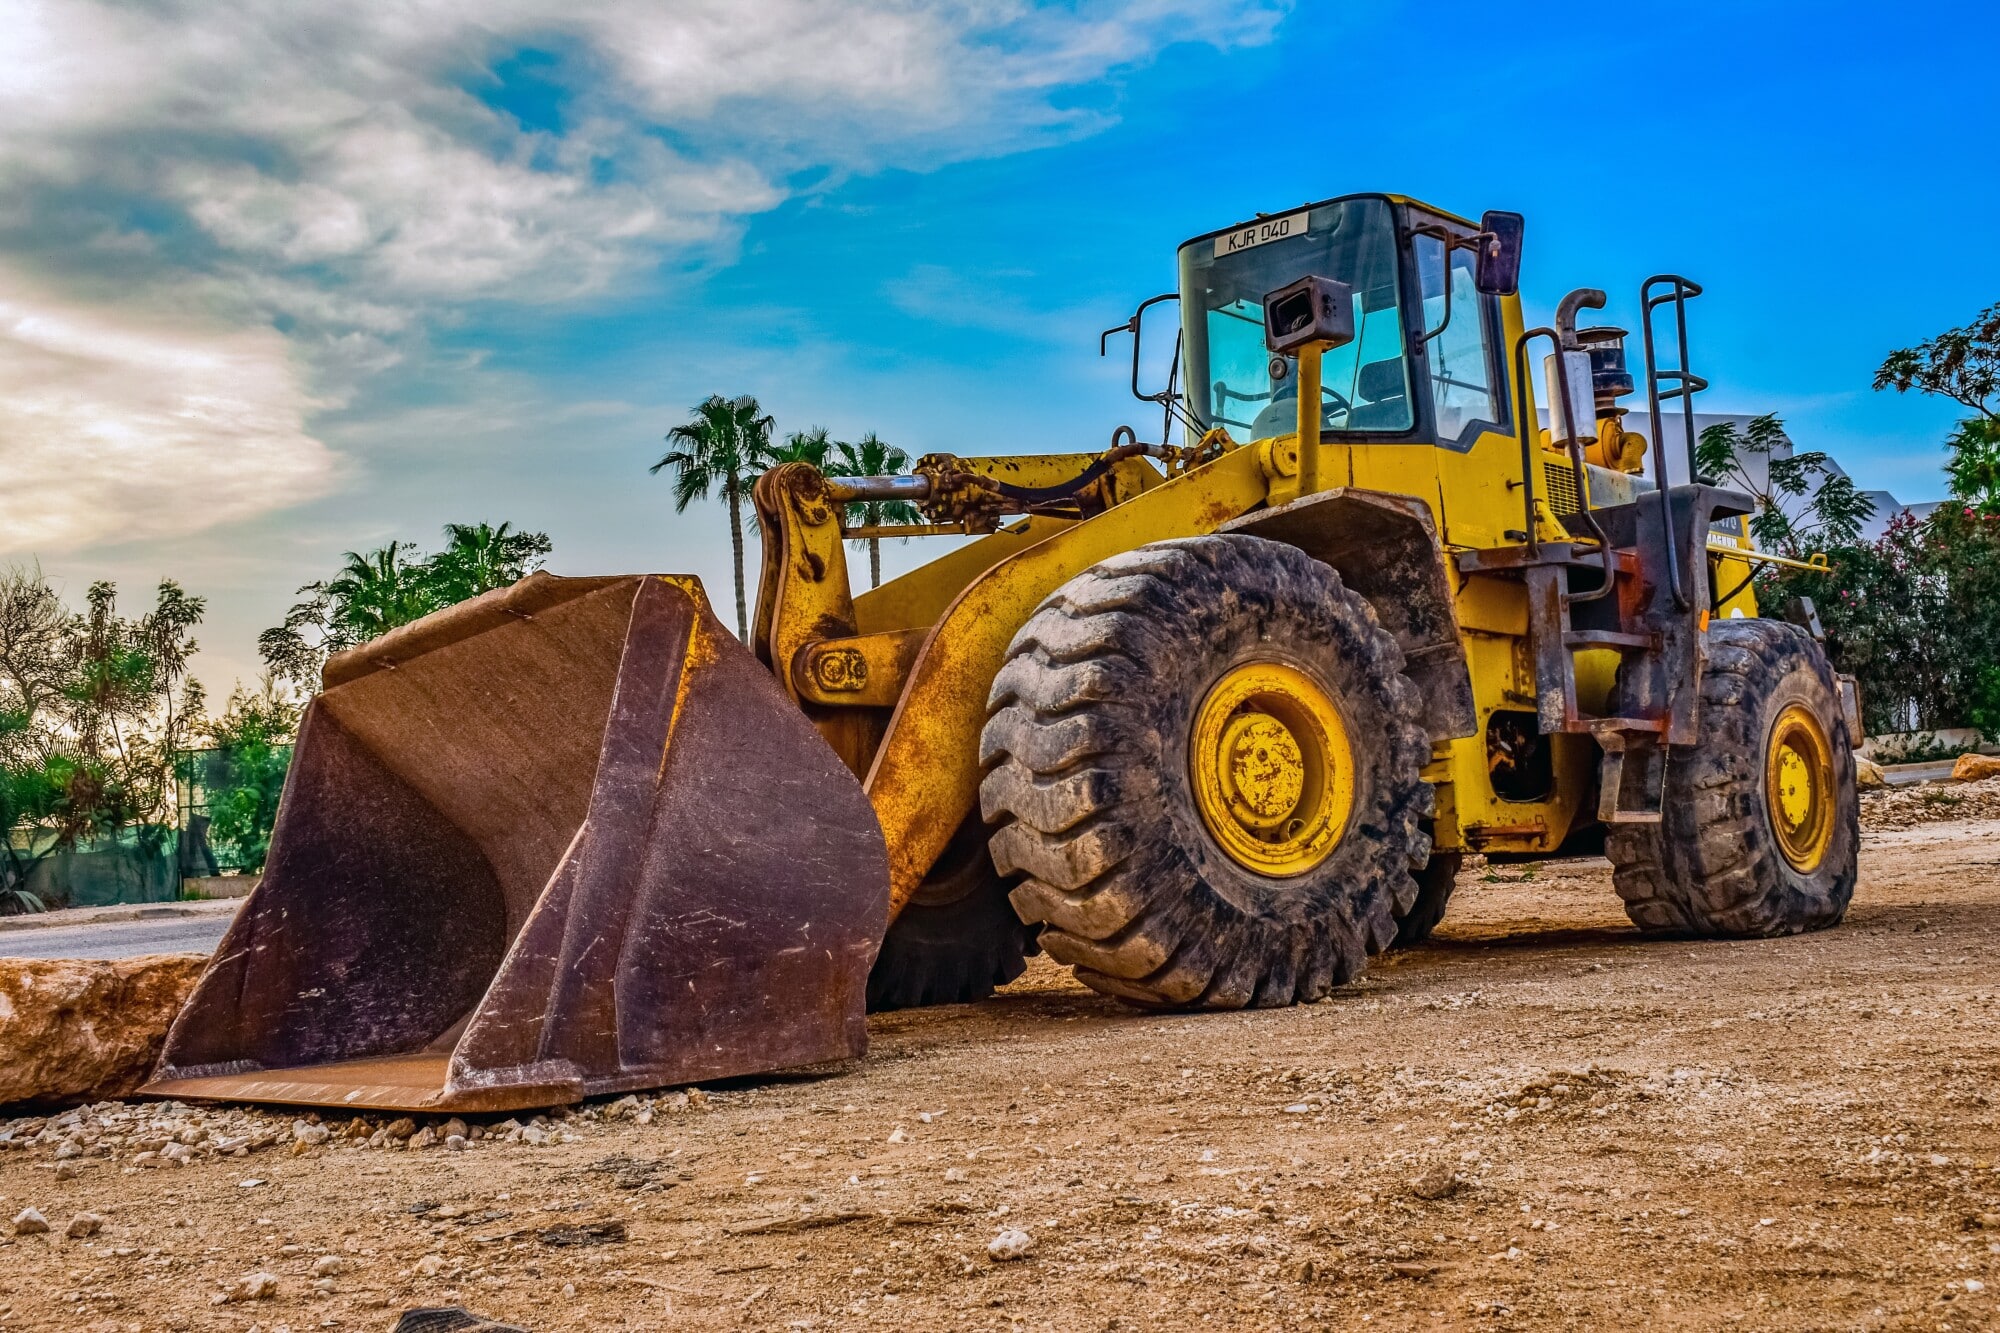 Renting Heavy Construction Equipment Can Be Beneficial: Flexibility and Efficient